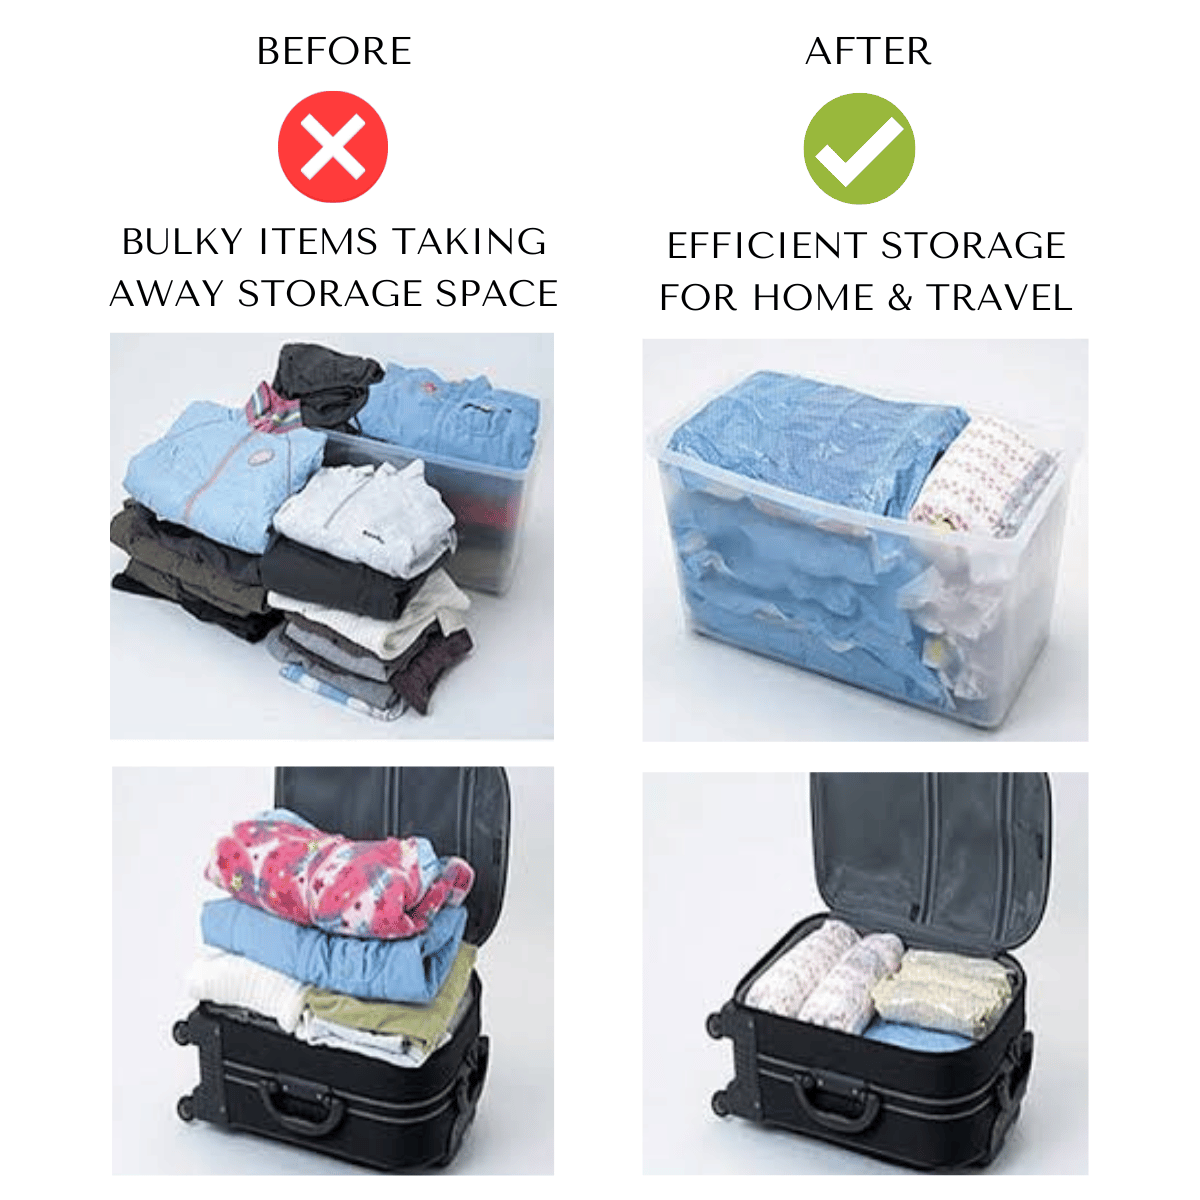 Results for vacuum storage bags